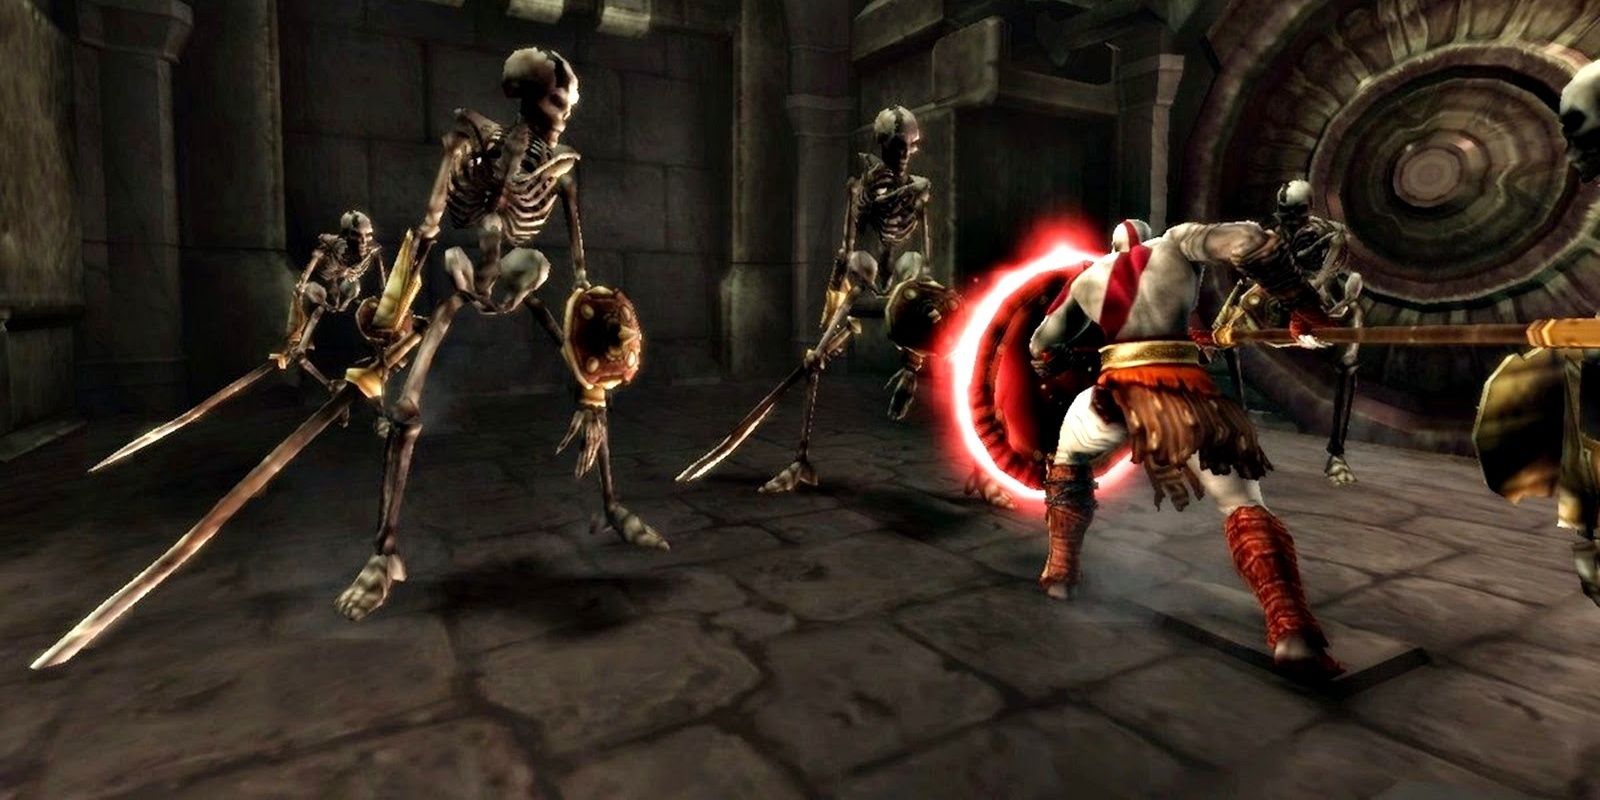 Kratos using the Arms of Sparta to fight undead soldiers, in God of War Ghost of Sparta